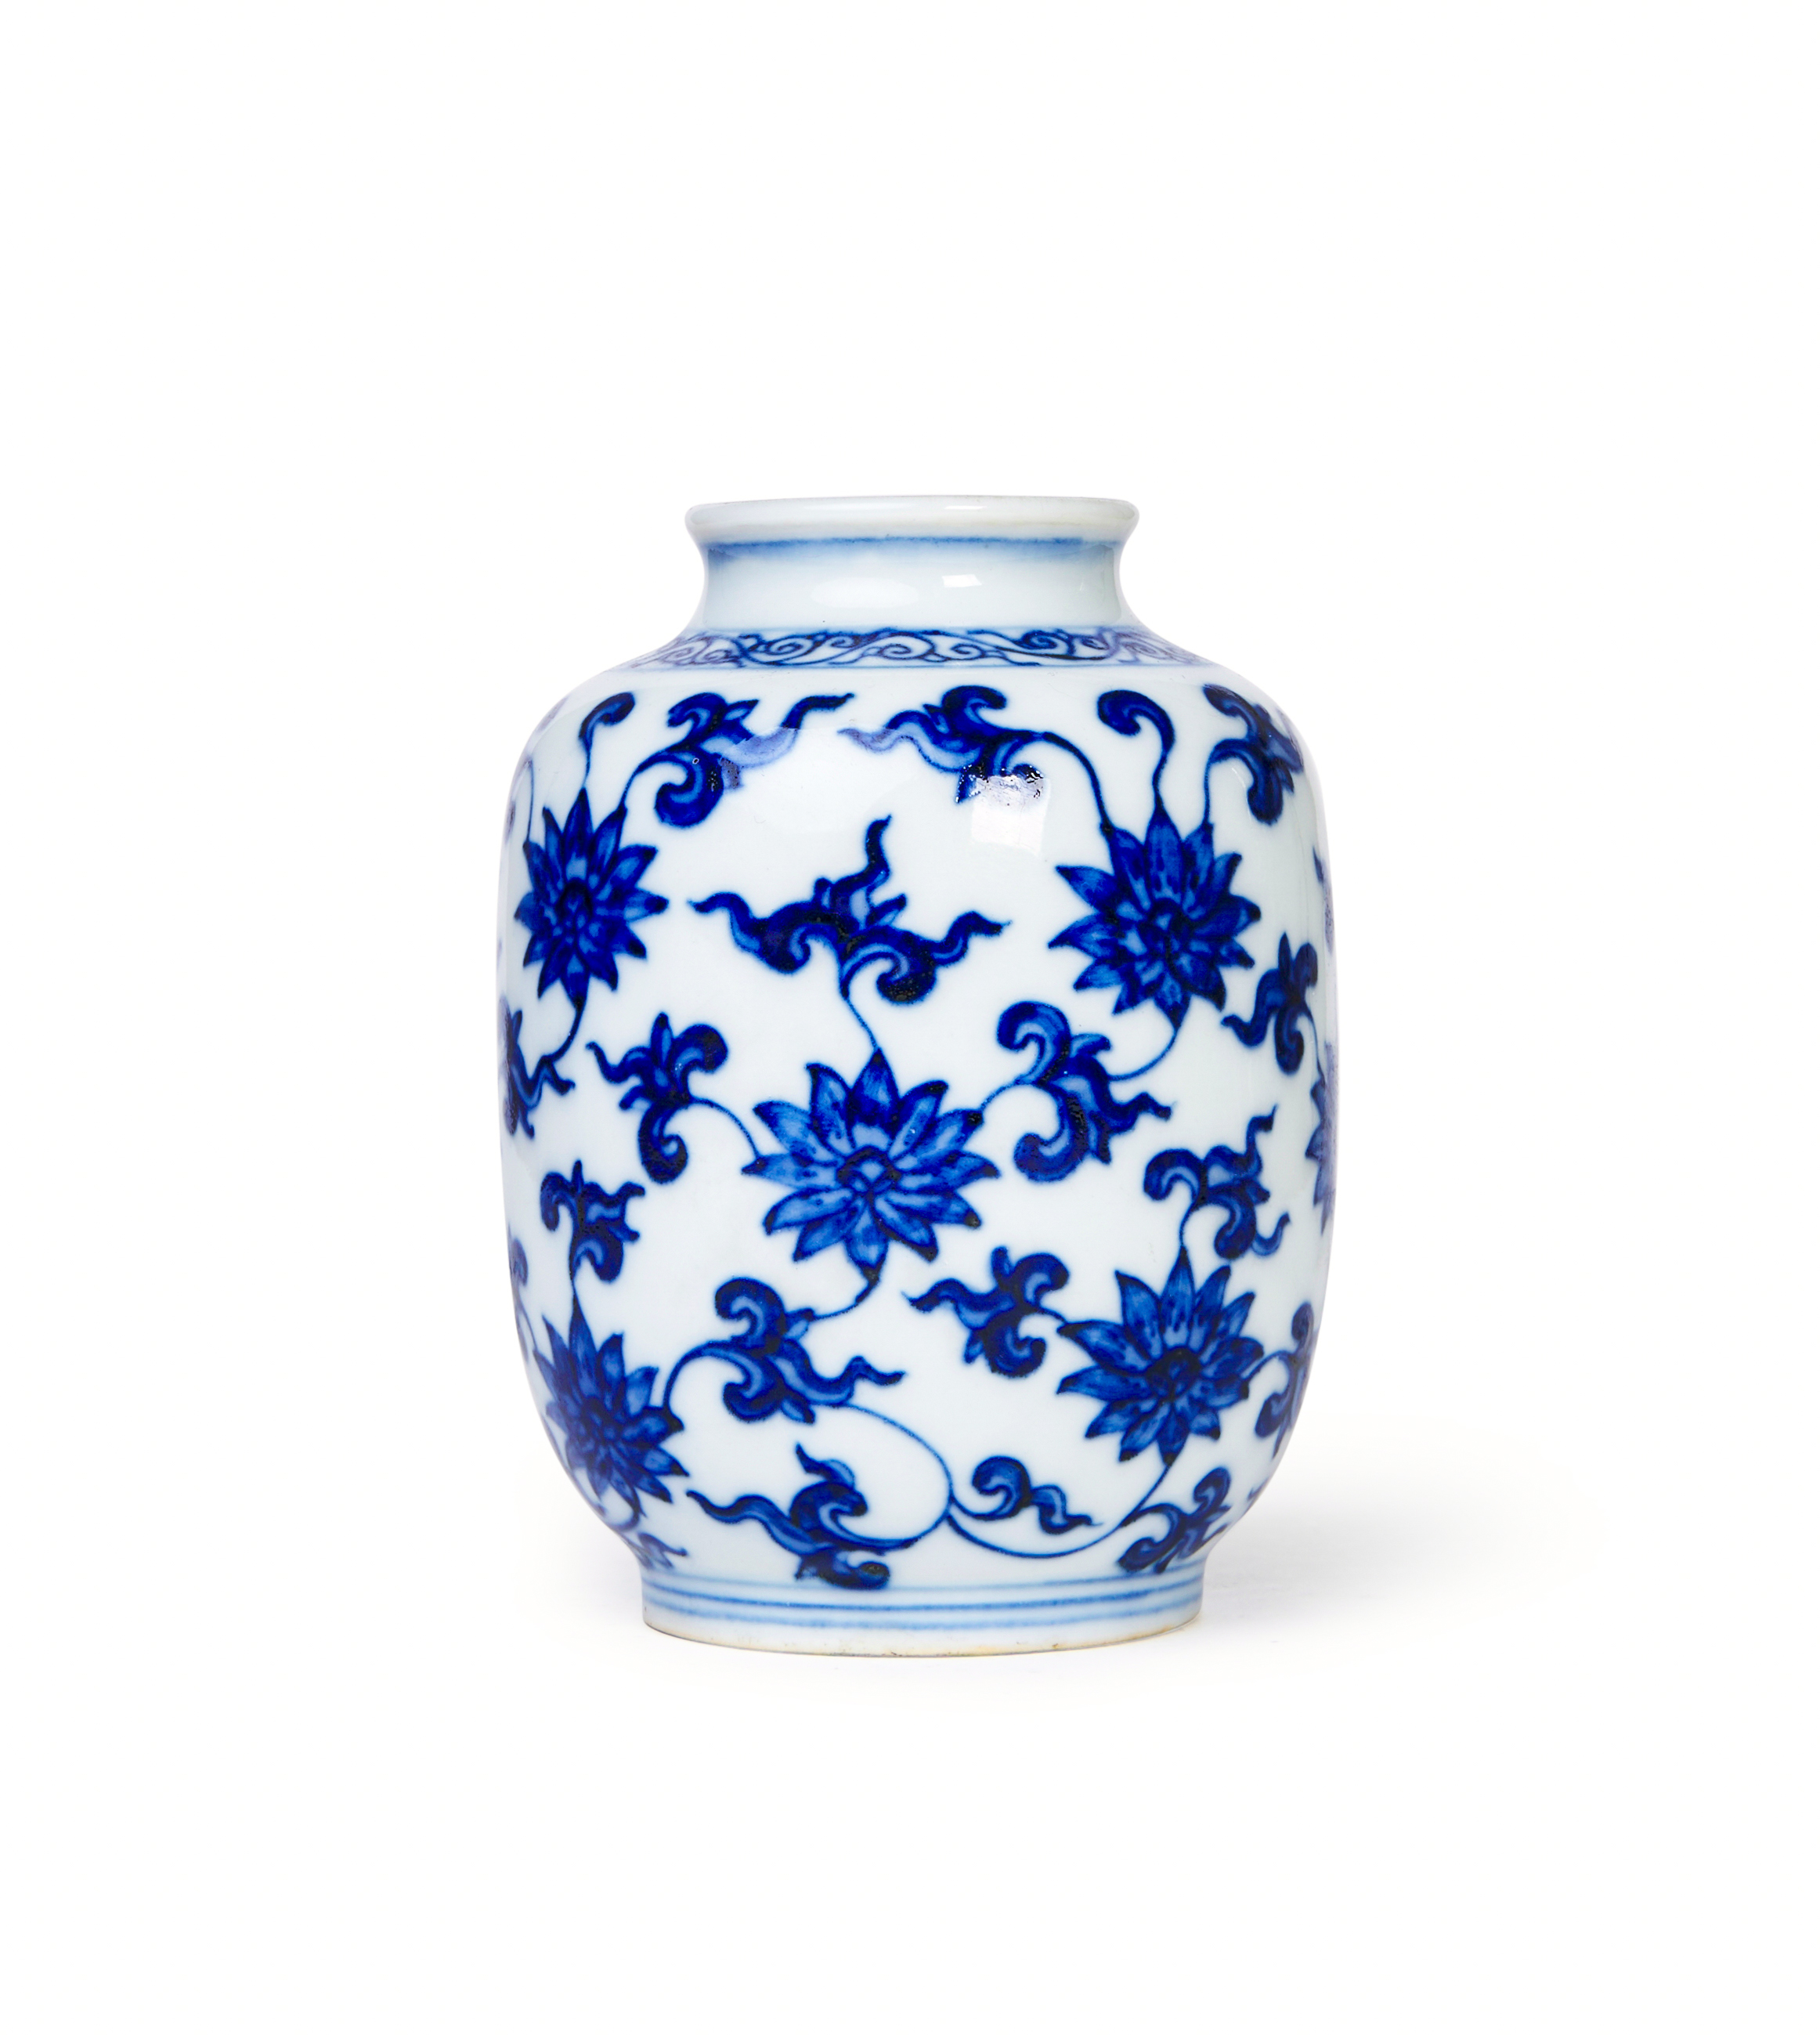 A CHINESE BLUE AND WHITE 'LOTUS' VASE, YONGZHENG SIX CHARACTER MARK & POSSIBLY OF THE PERIOD